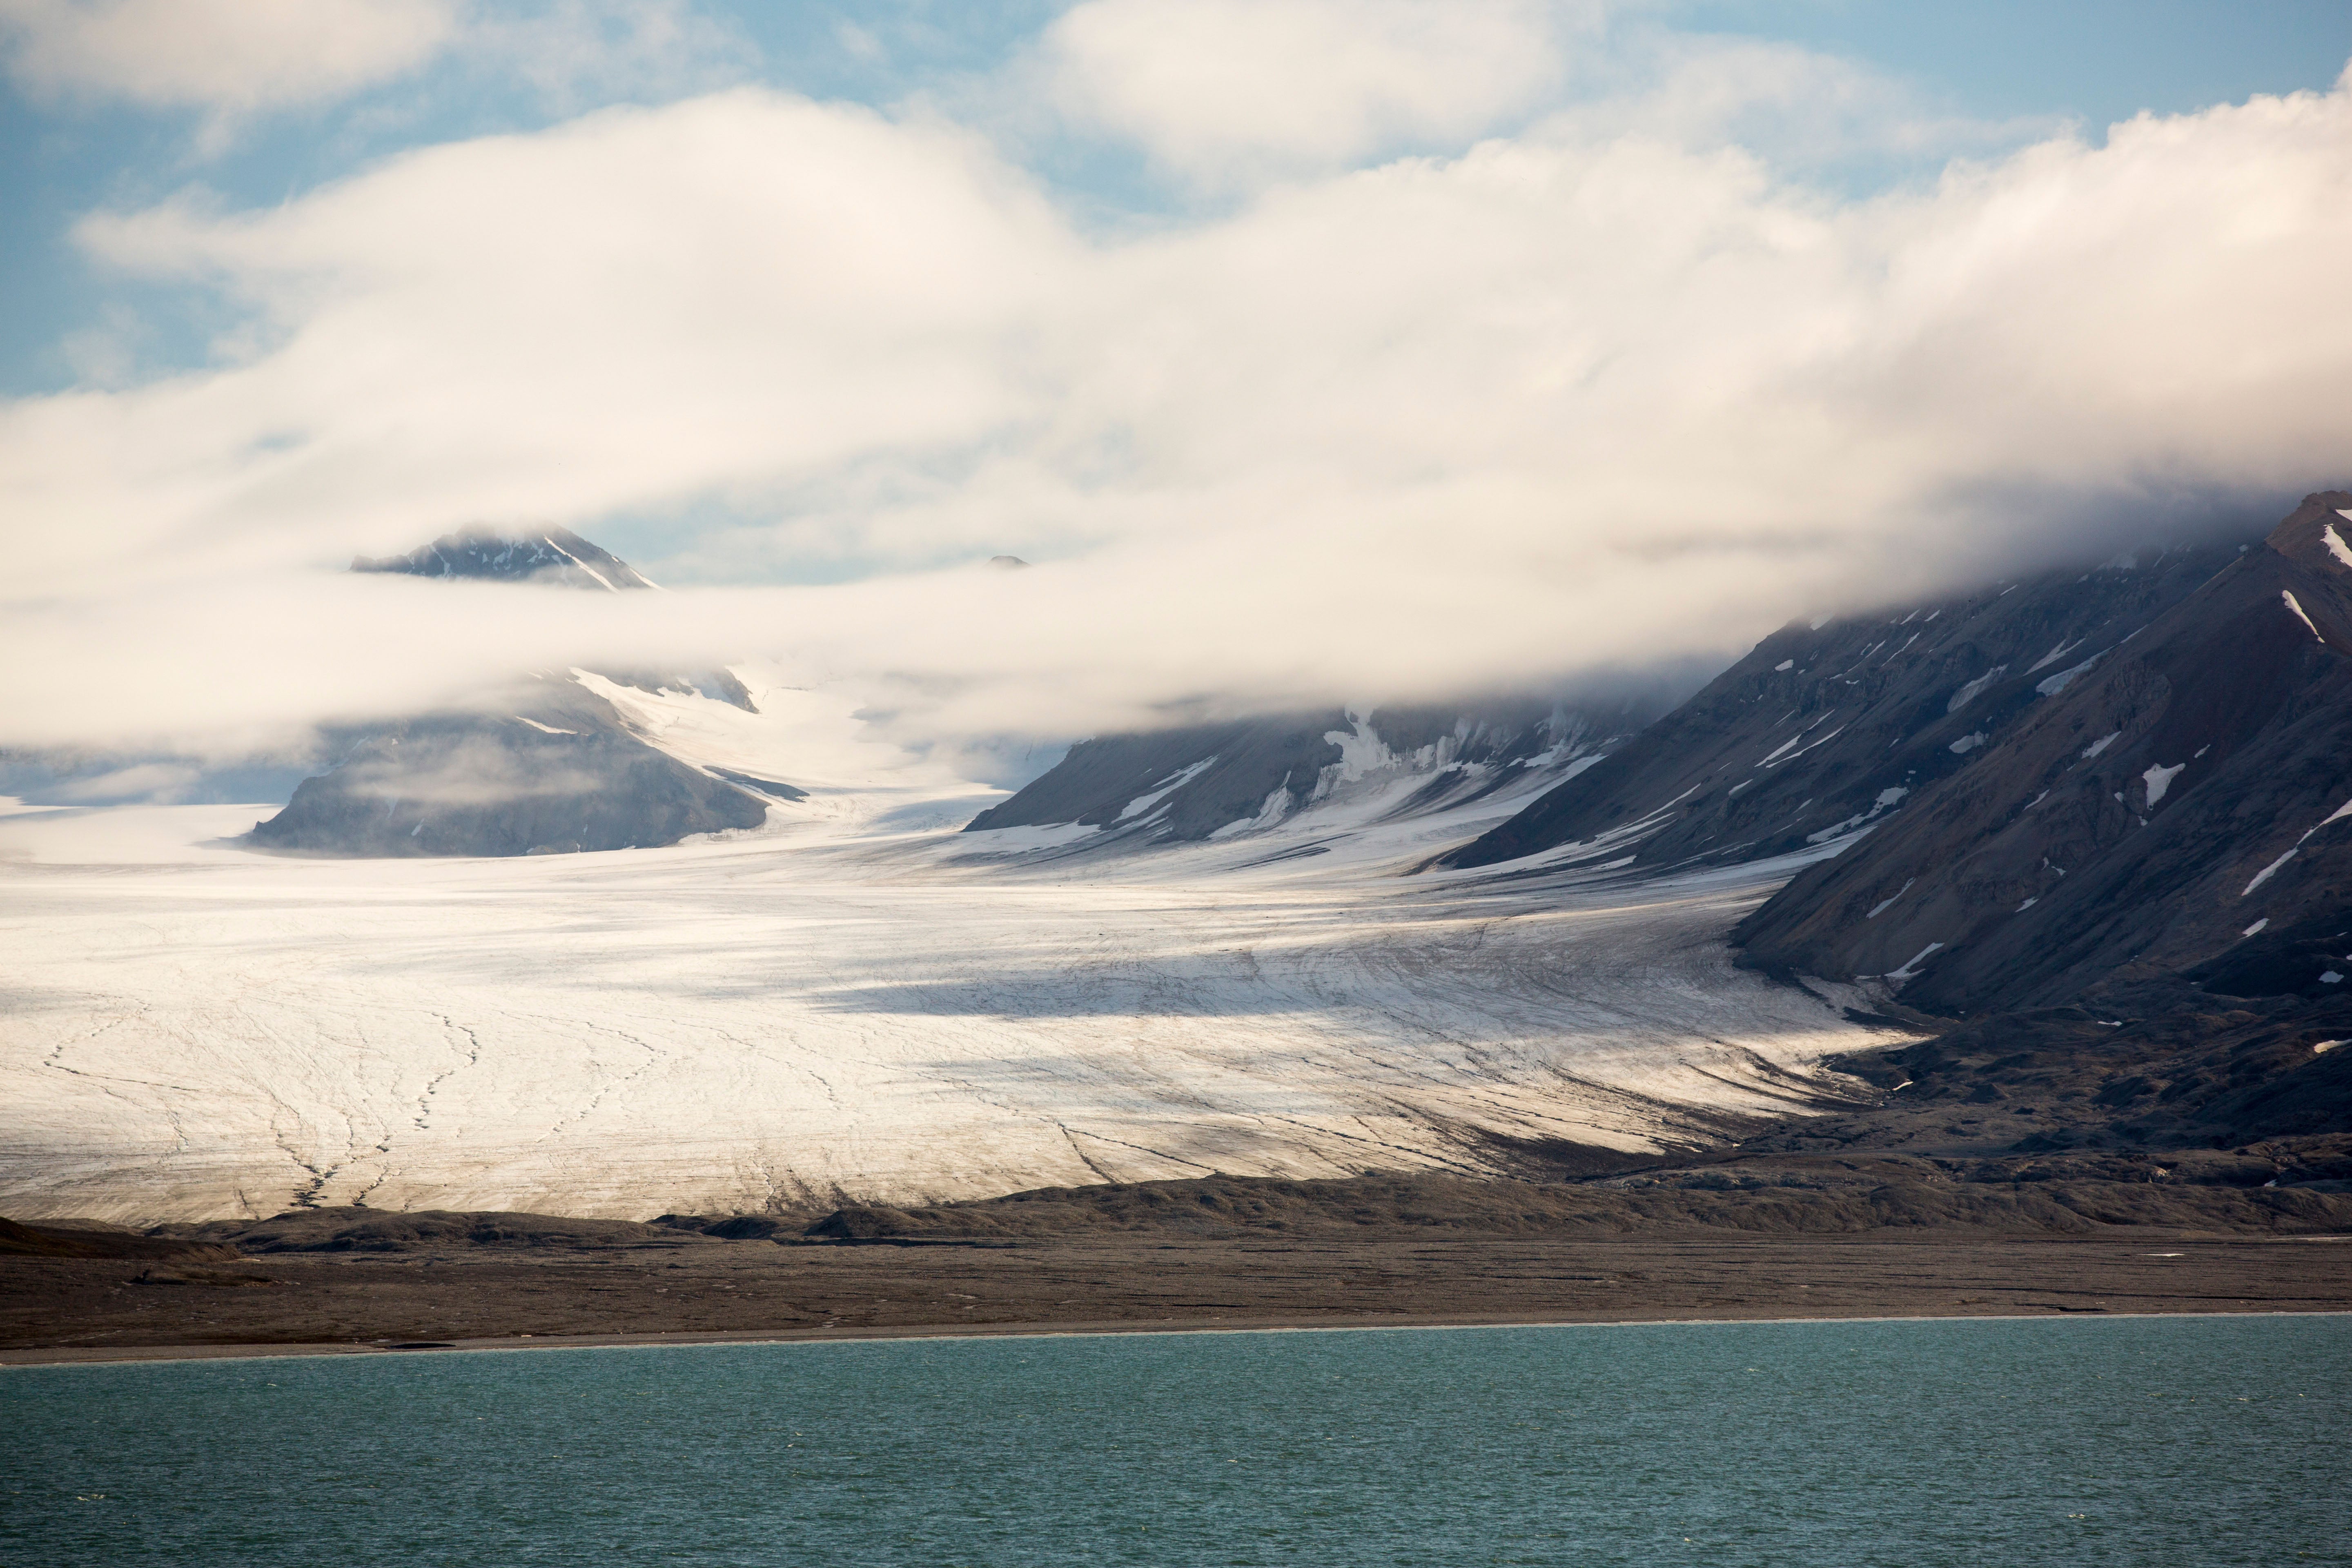 Keep an eye out for seals and beluga whales on your cruise through the glaciers of Svalbard